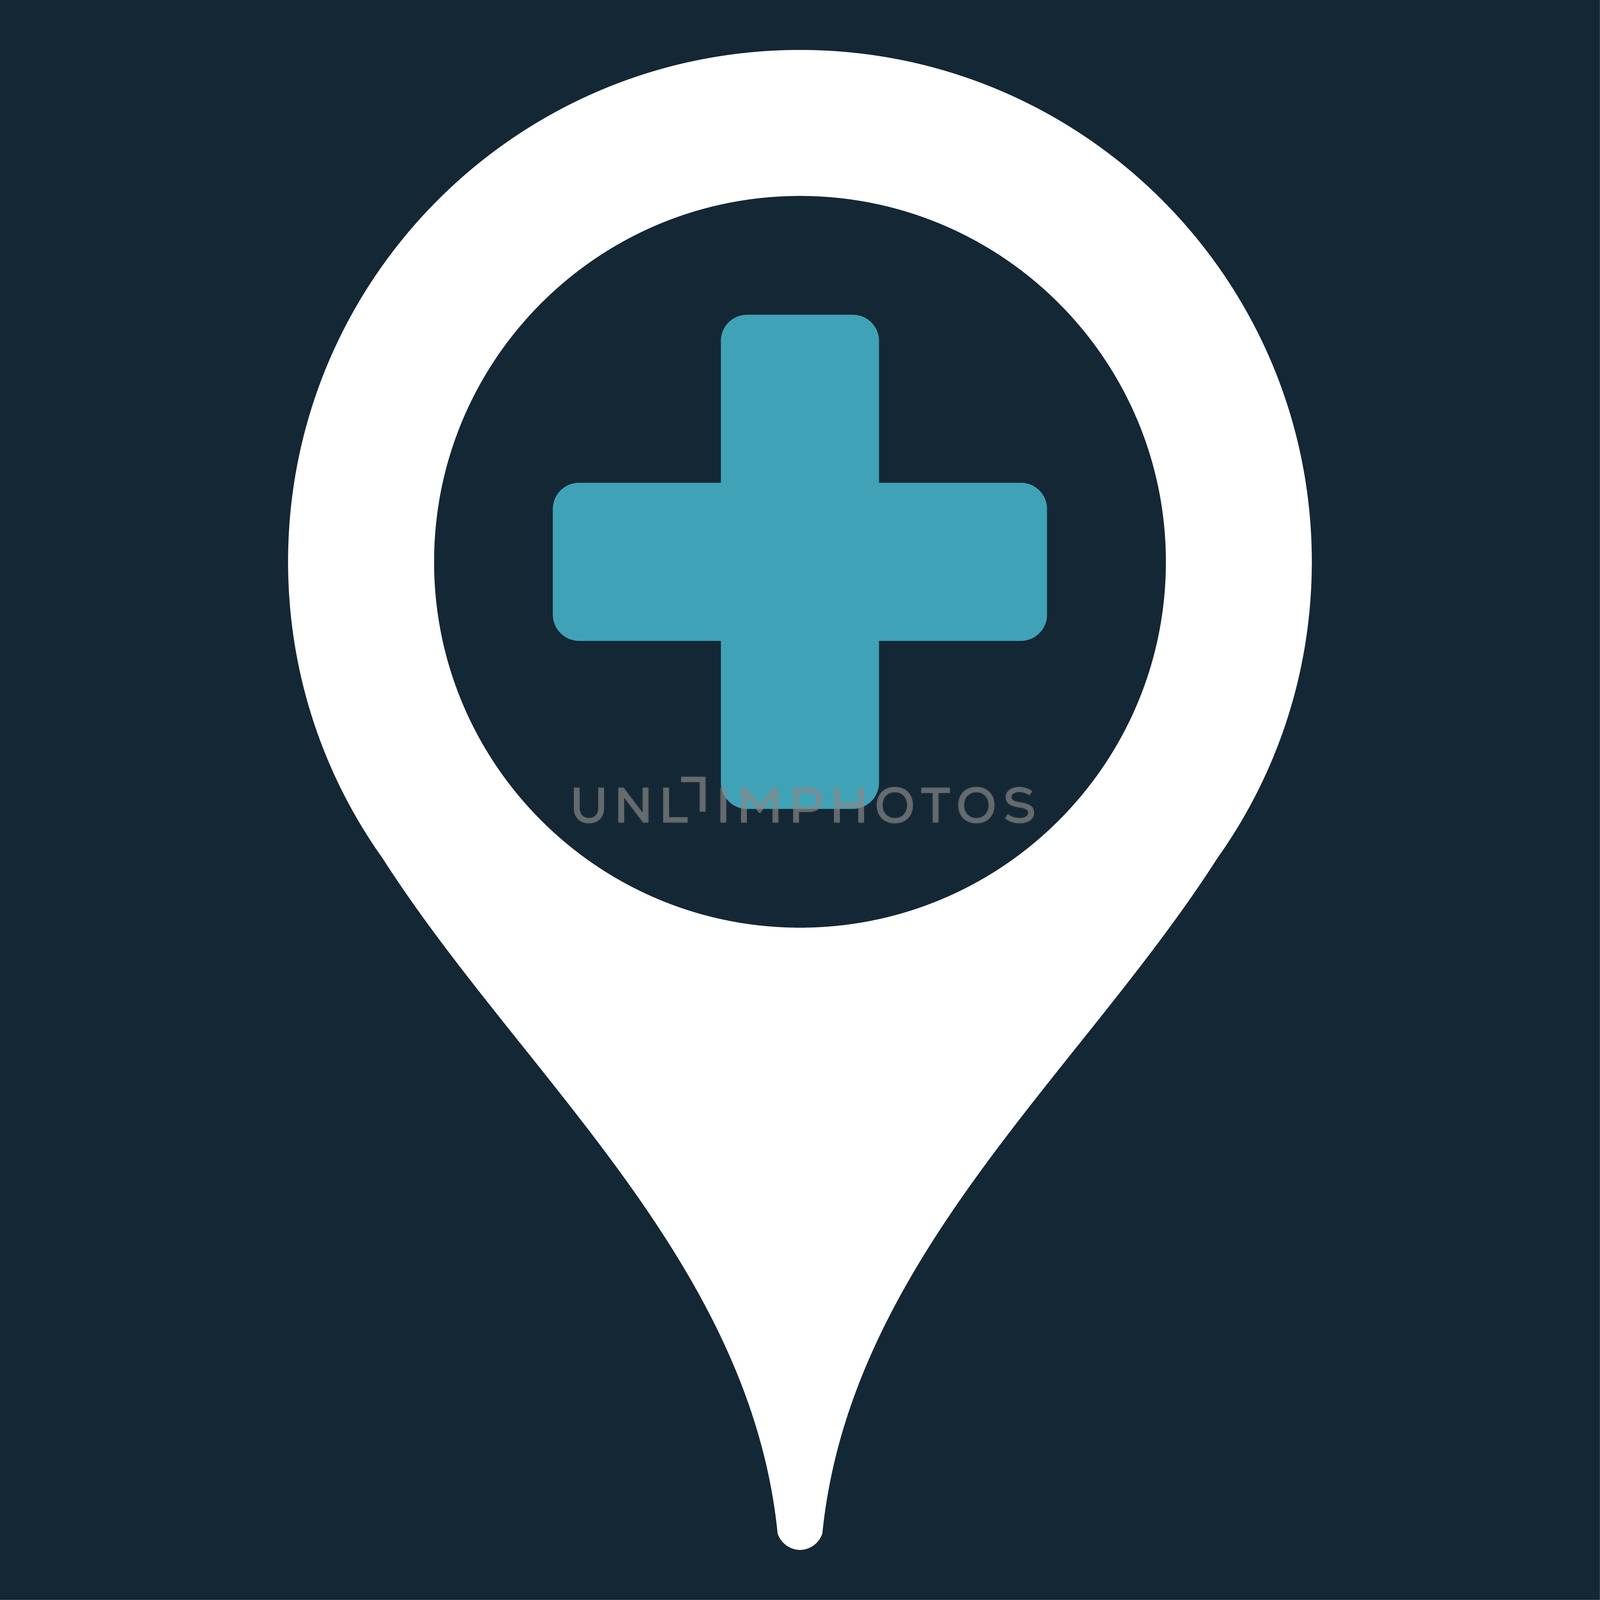 Hospital Map Pointer raster icon. Style is bicolor flat symbol, blue and white colors, rounded angles, dark blue background.